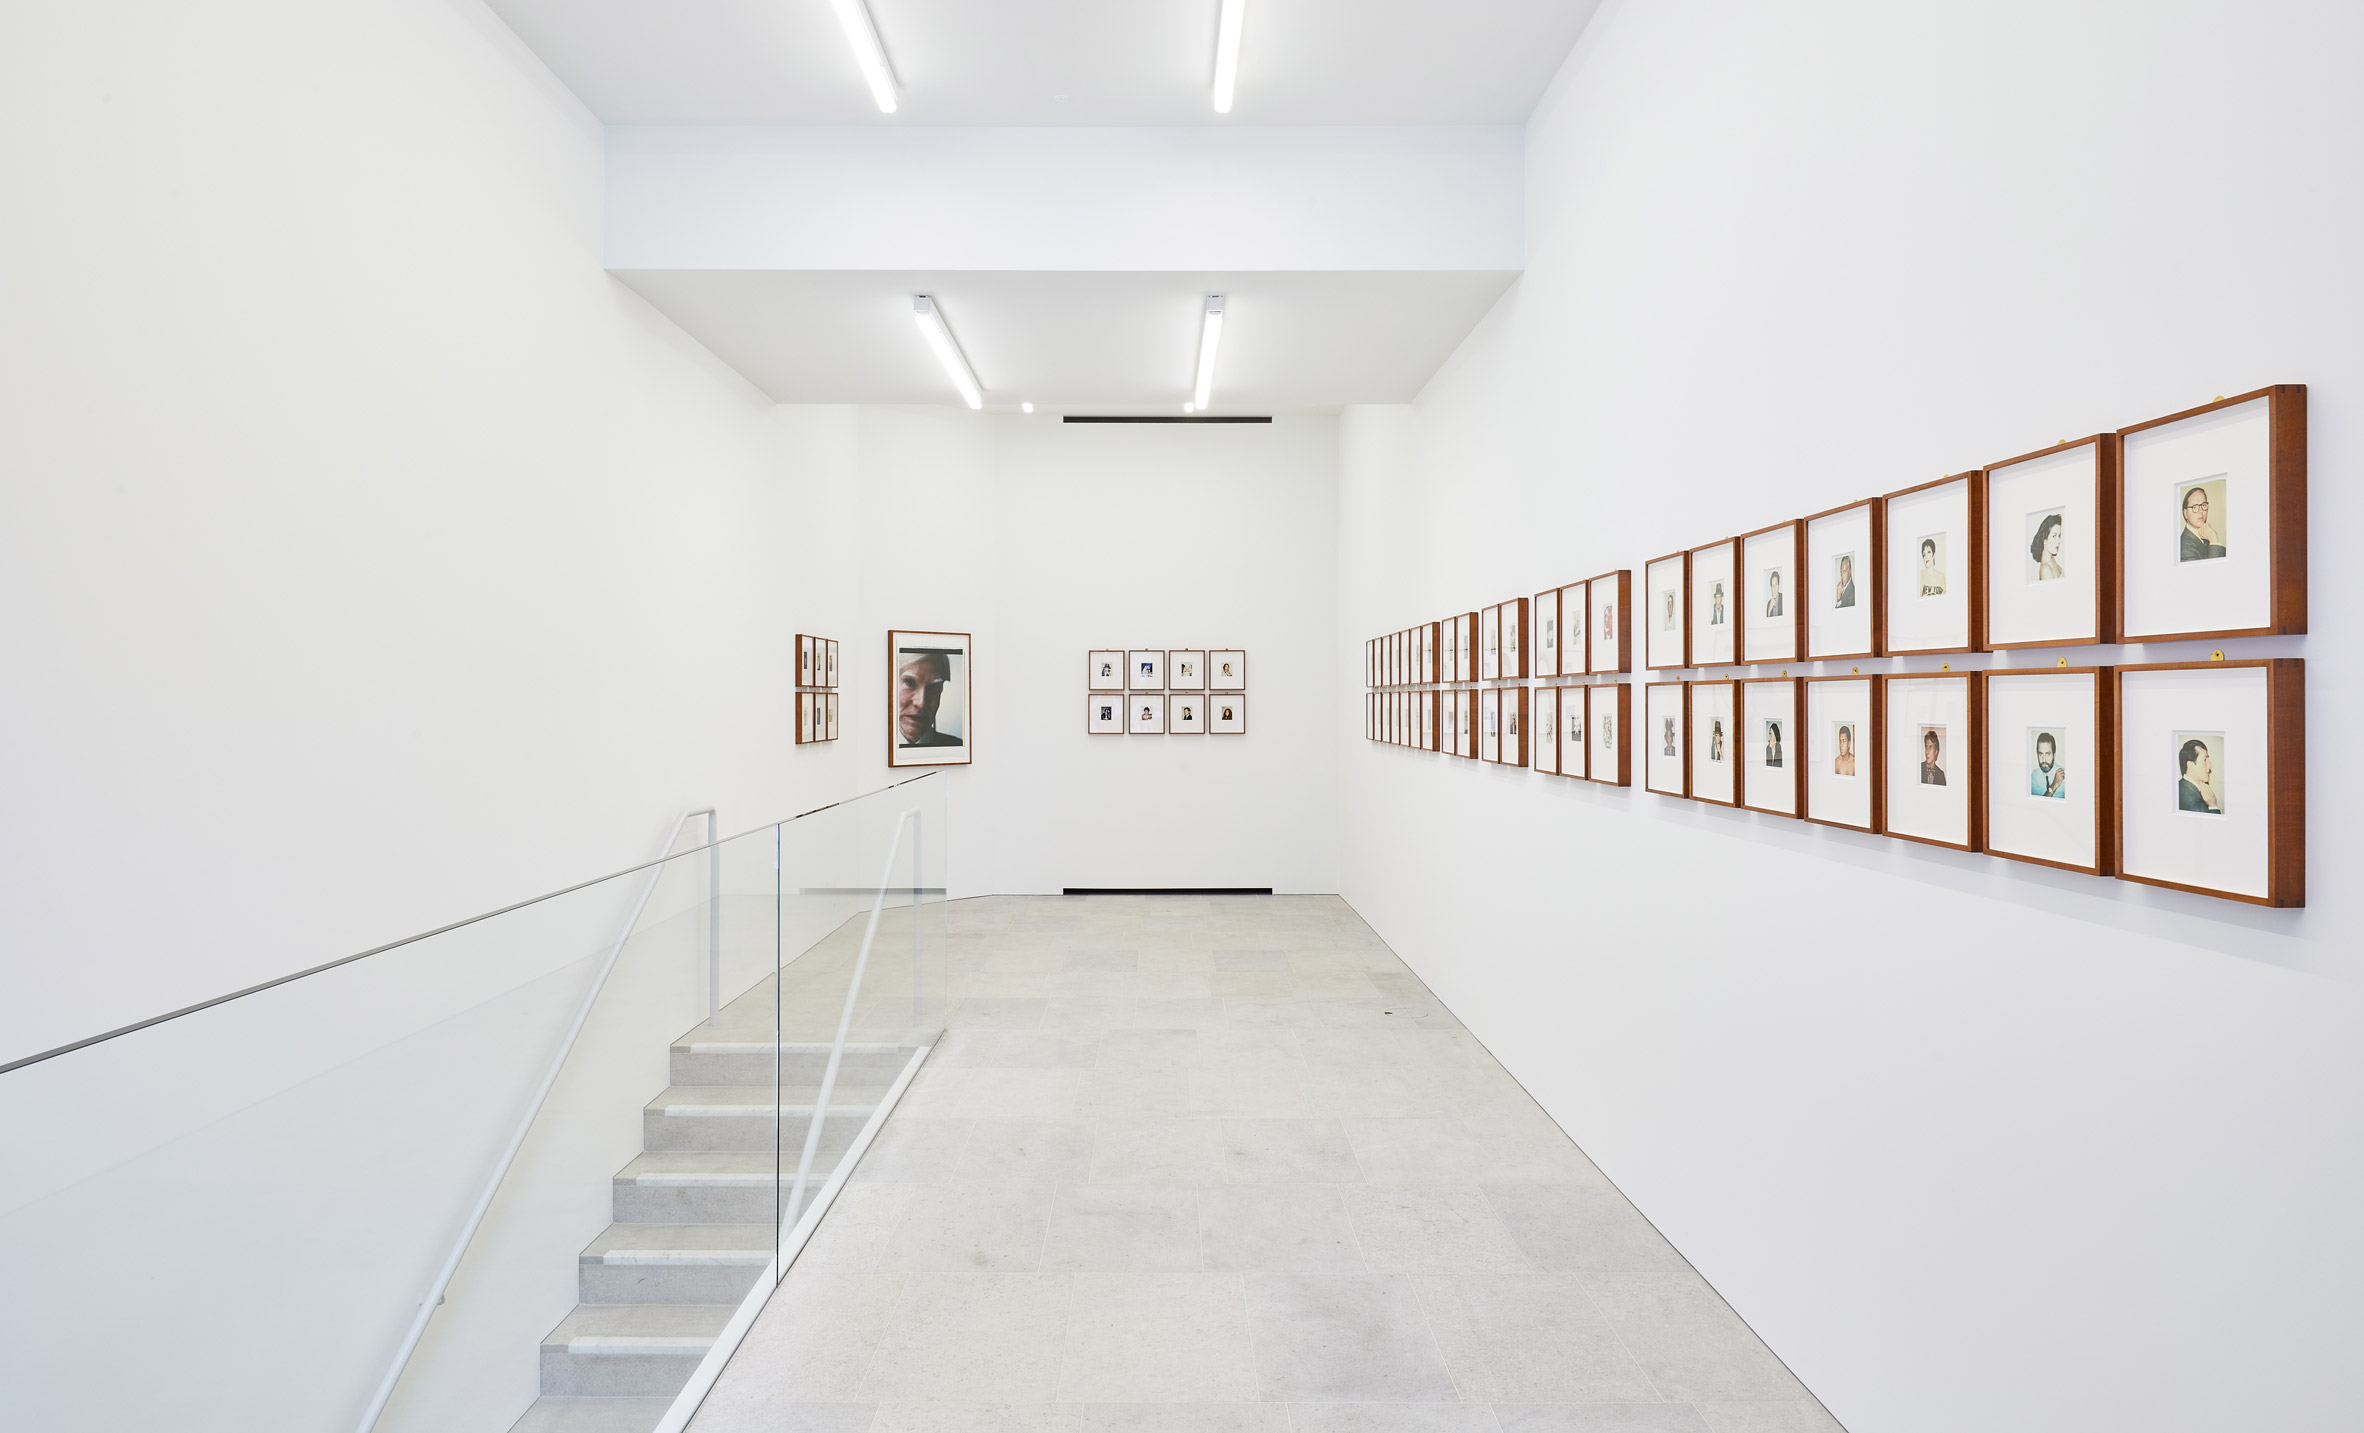 Bastian gallery's London outpost designed by David Chipperfield Architects